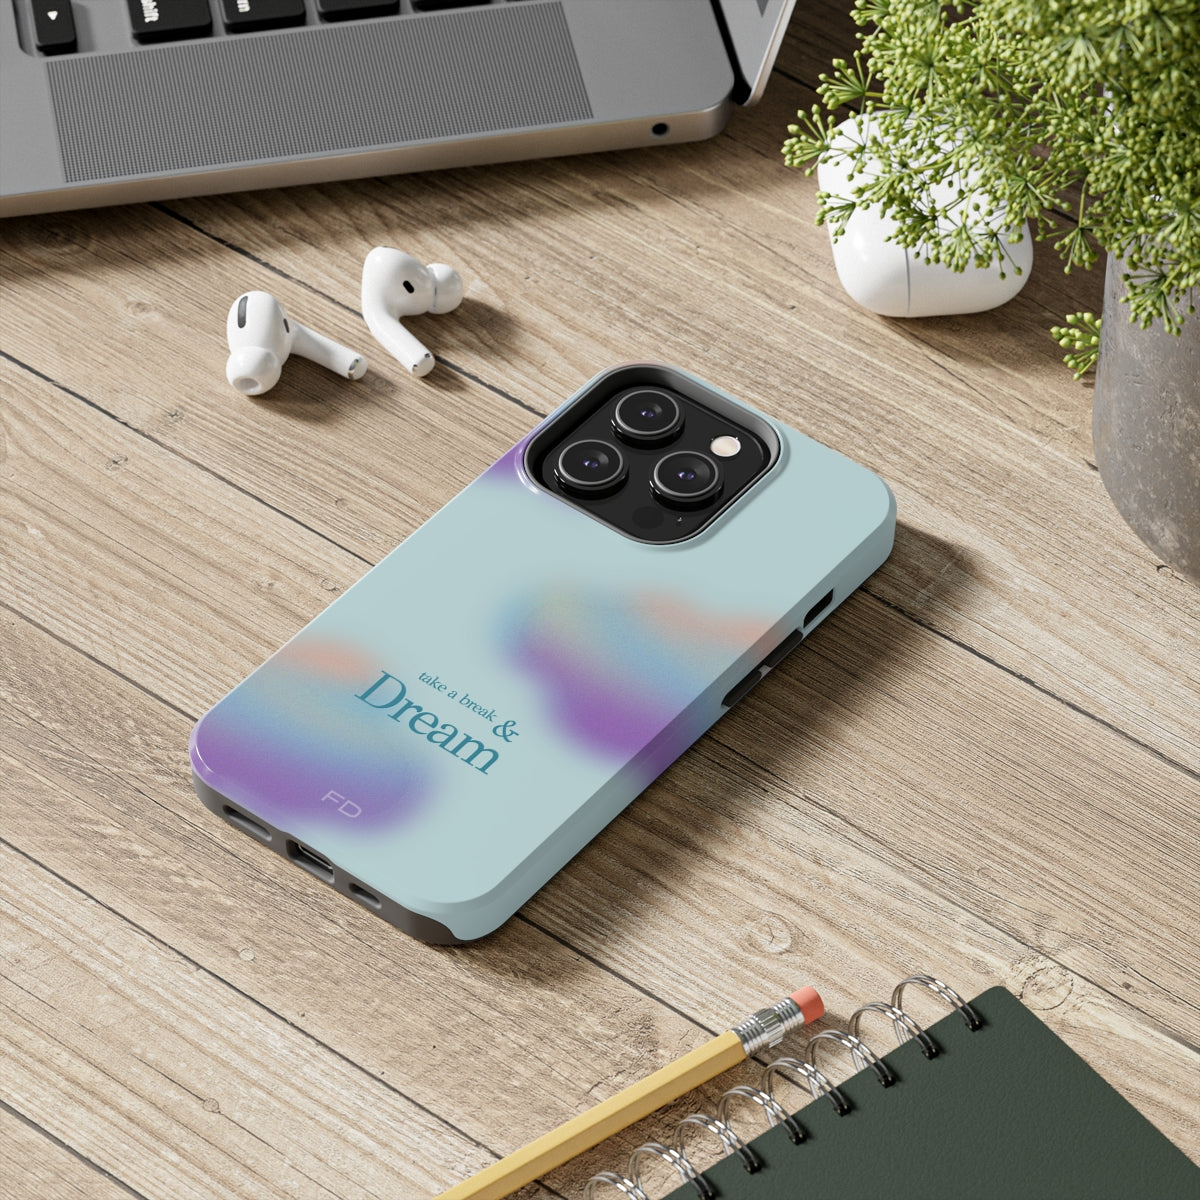 Take a Break and Dream Tough Case for iPhone Supports Wireless Charging